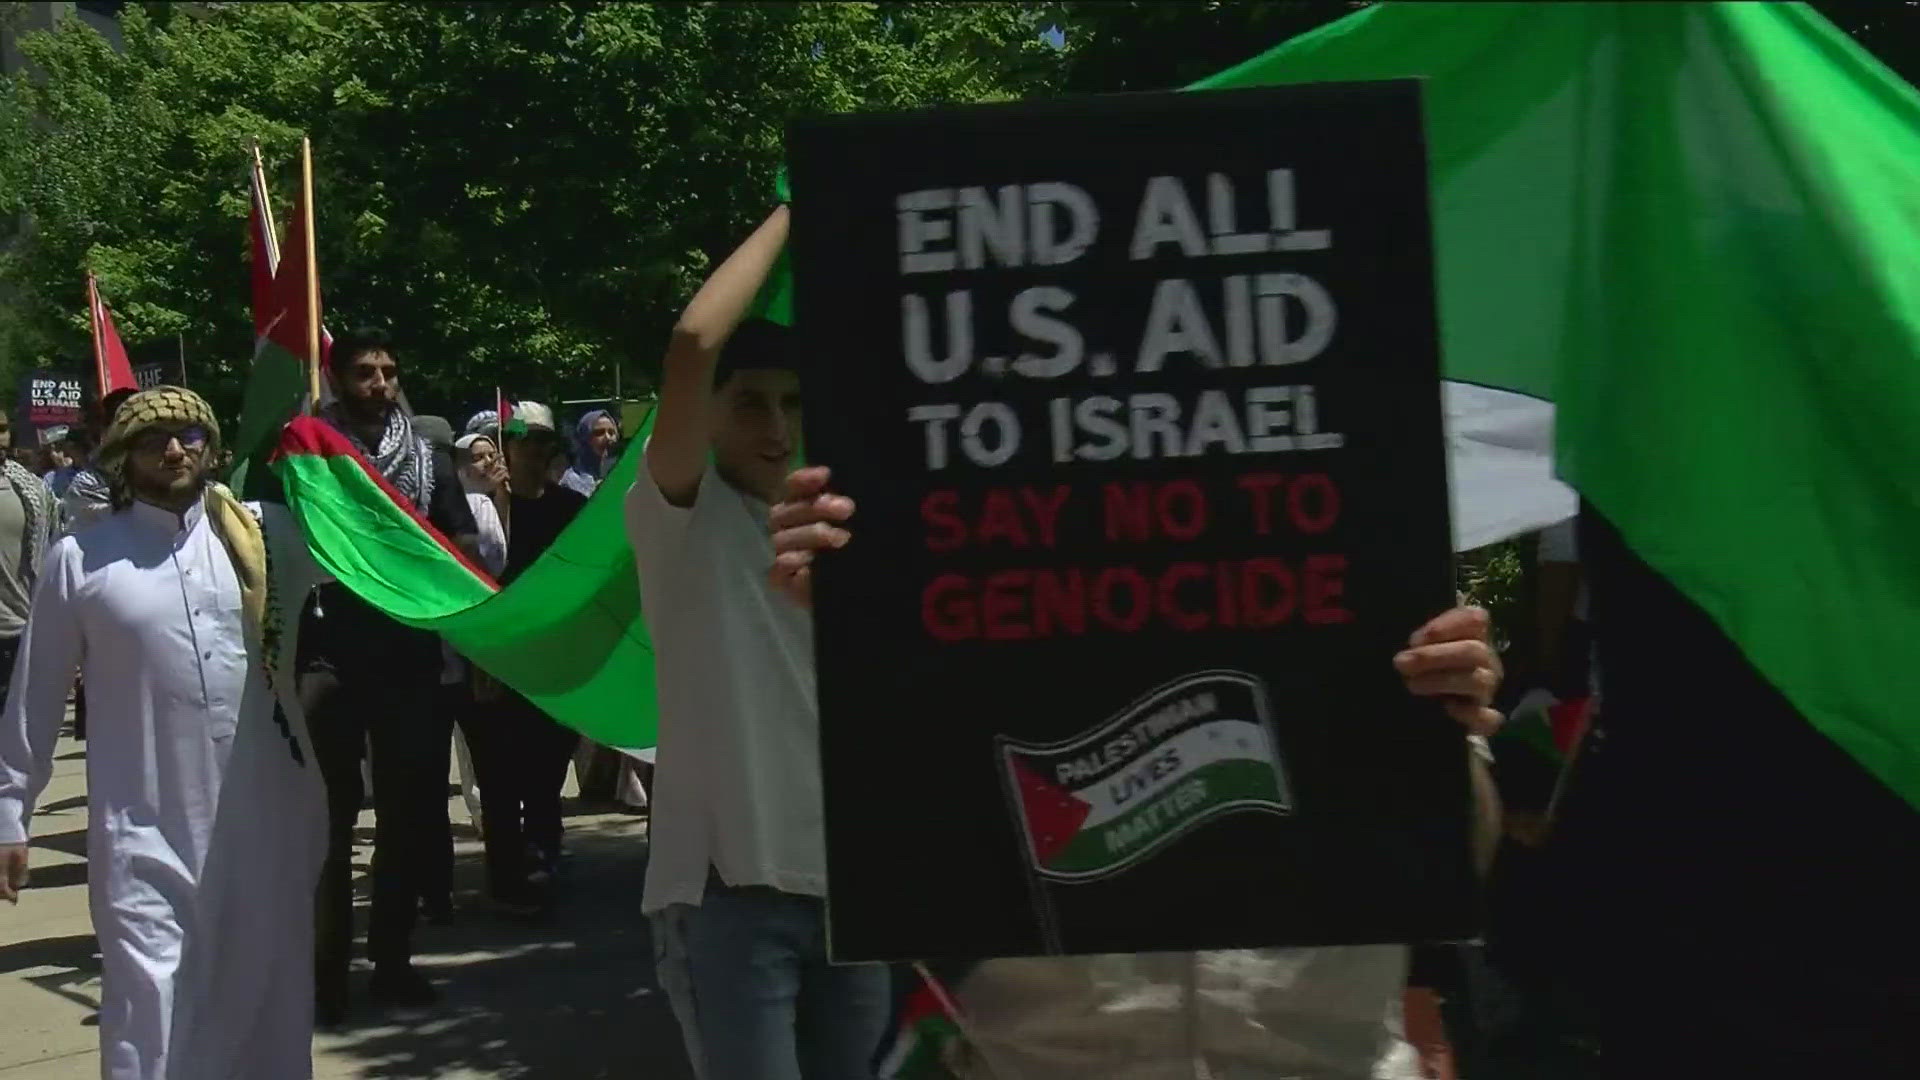 The ‘No Celebration Under Occupation’ march in Toledo on Sunday aimed to remind people of the suffering happening in Gaza on one of Islam’s most important holidays.